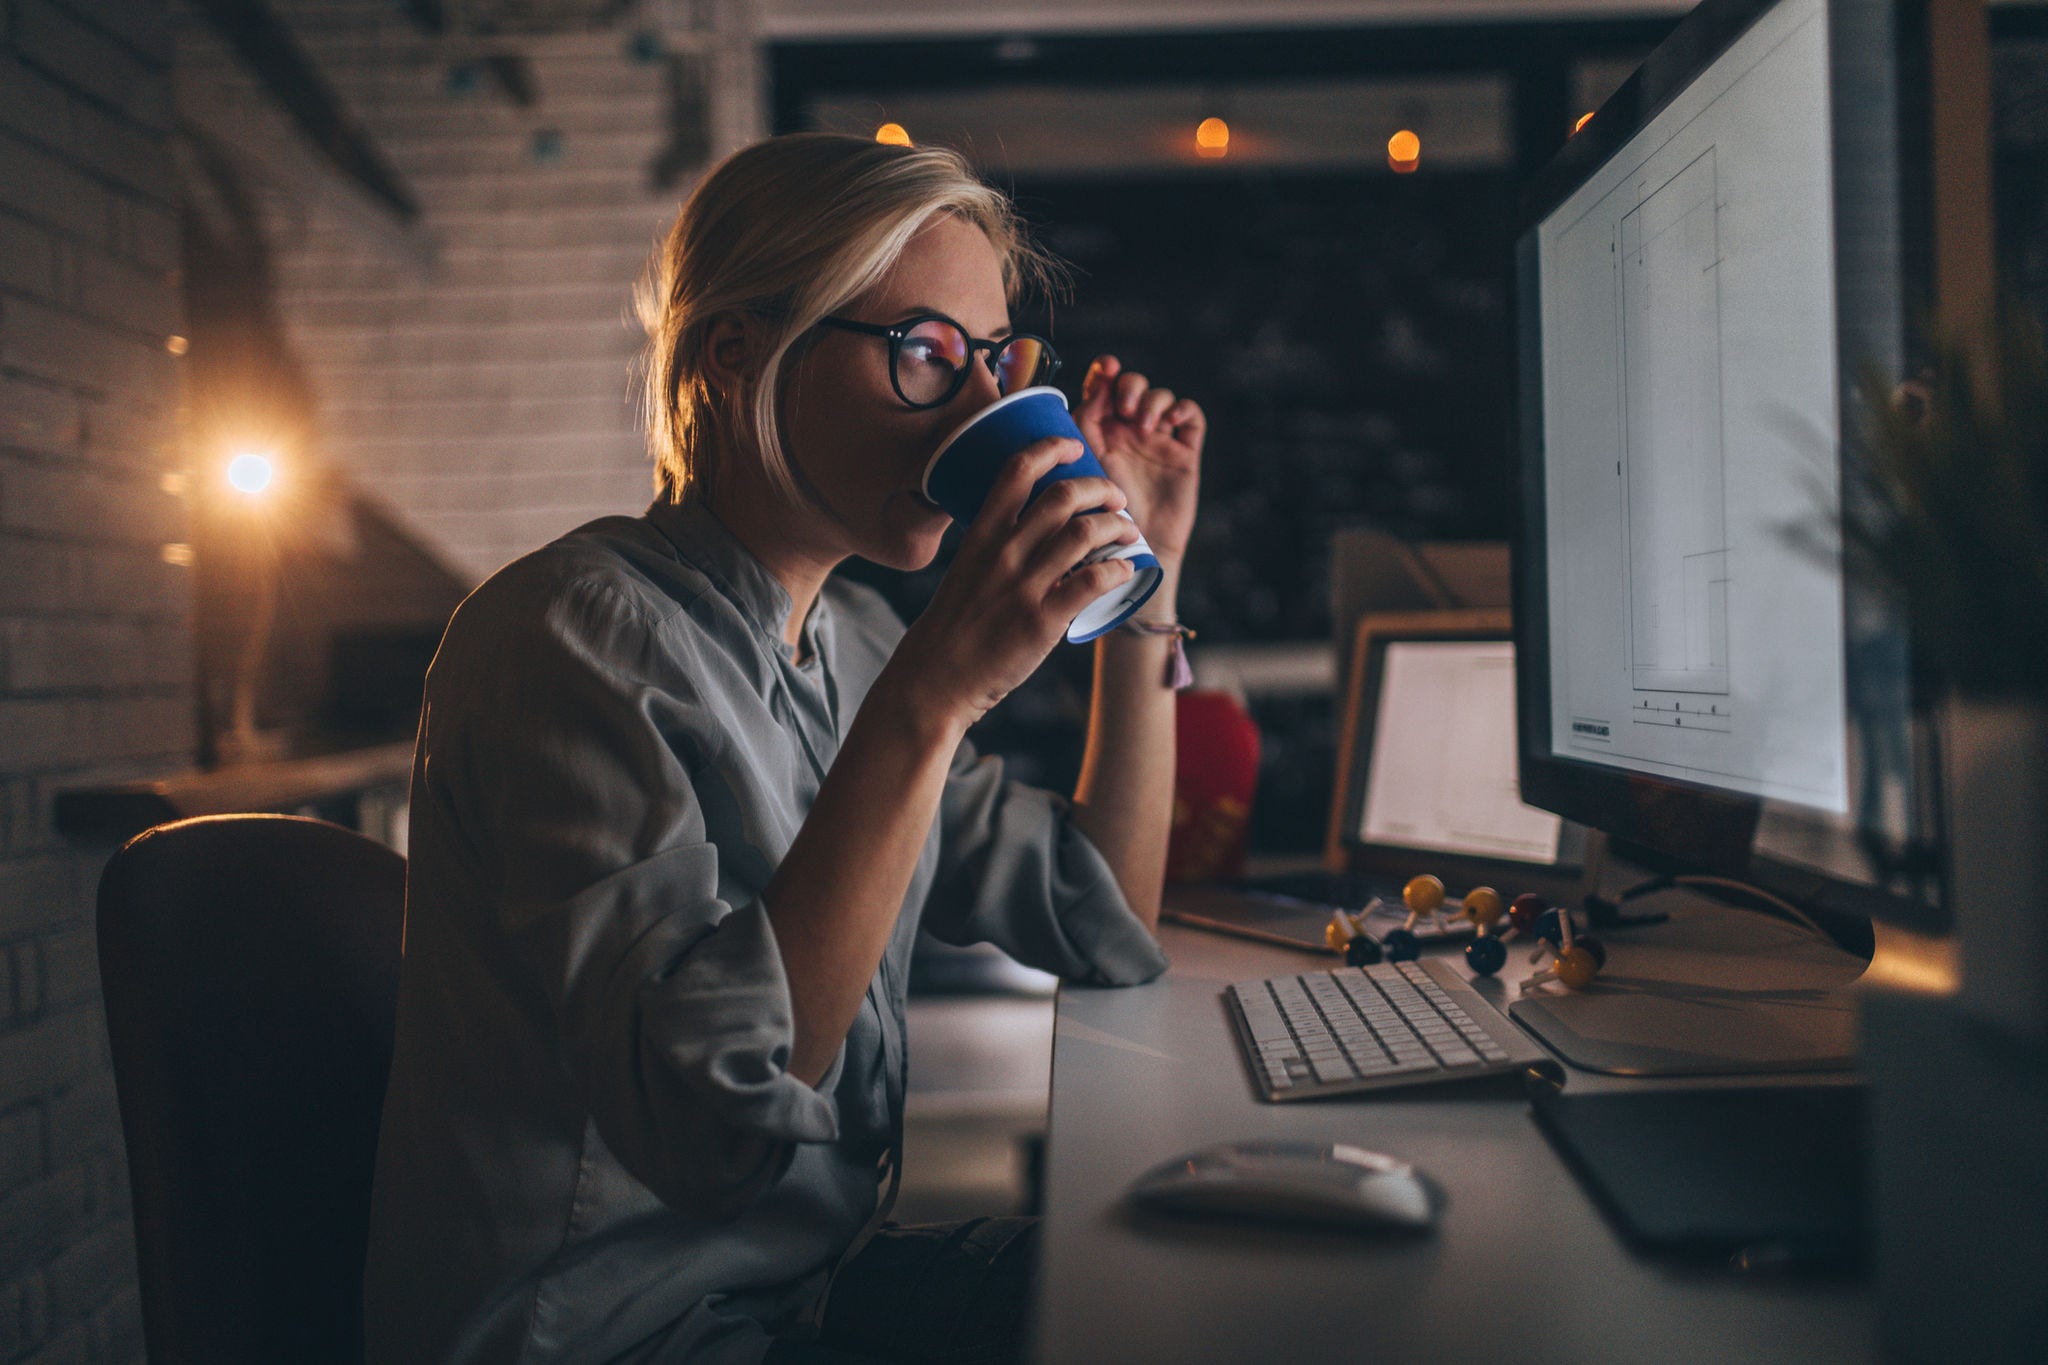 A young woman with blonde hair and glasses is seated at a desk in a dimly lit office, holding a coffee mug while gazing at a large computer screen displaying architectural plans. She appears focused and thoughtful as she examines the details on the screen. Her workstation is equipped with multiple screens, a keyboard, and various other office supplies, creating a productive environment. Soft lighting from a desk lamp and ambient lights in the background add a warm atmosphere to the setting.